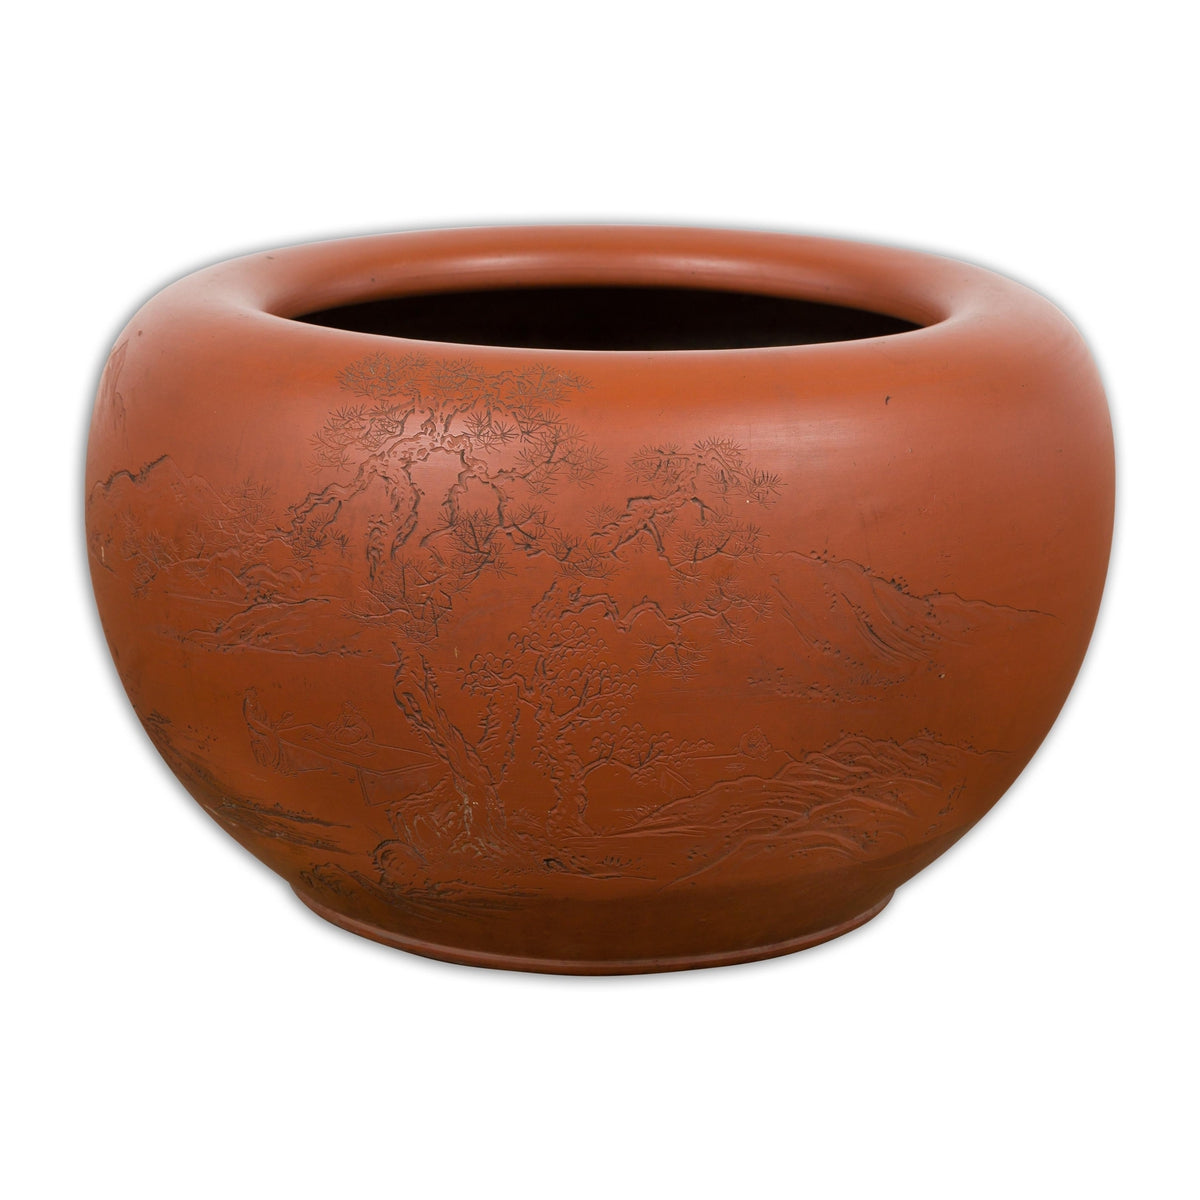 Orange Circular Antique Planter with Etched Design-YN7819-20. Asian & Chinese Furniture, Art, Antiques, Vintage Home Décor for sale at FEA Home